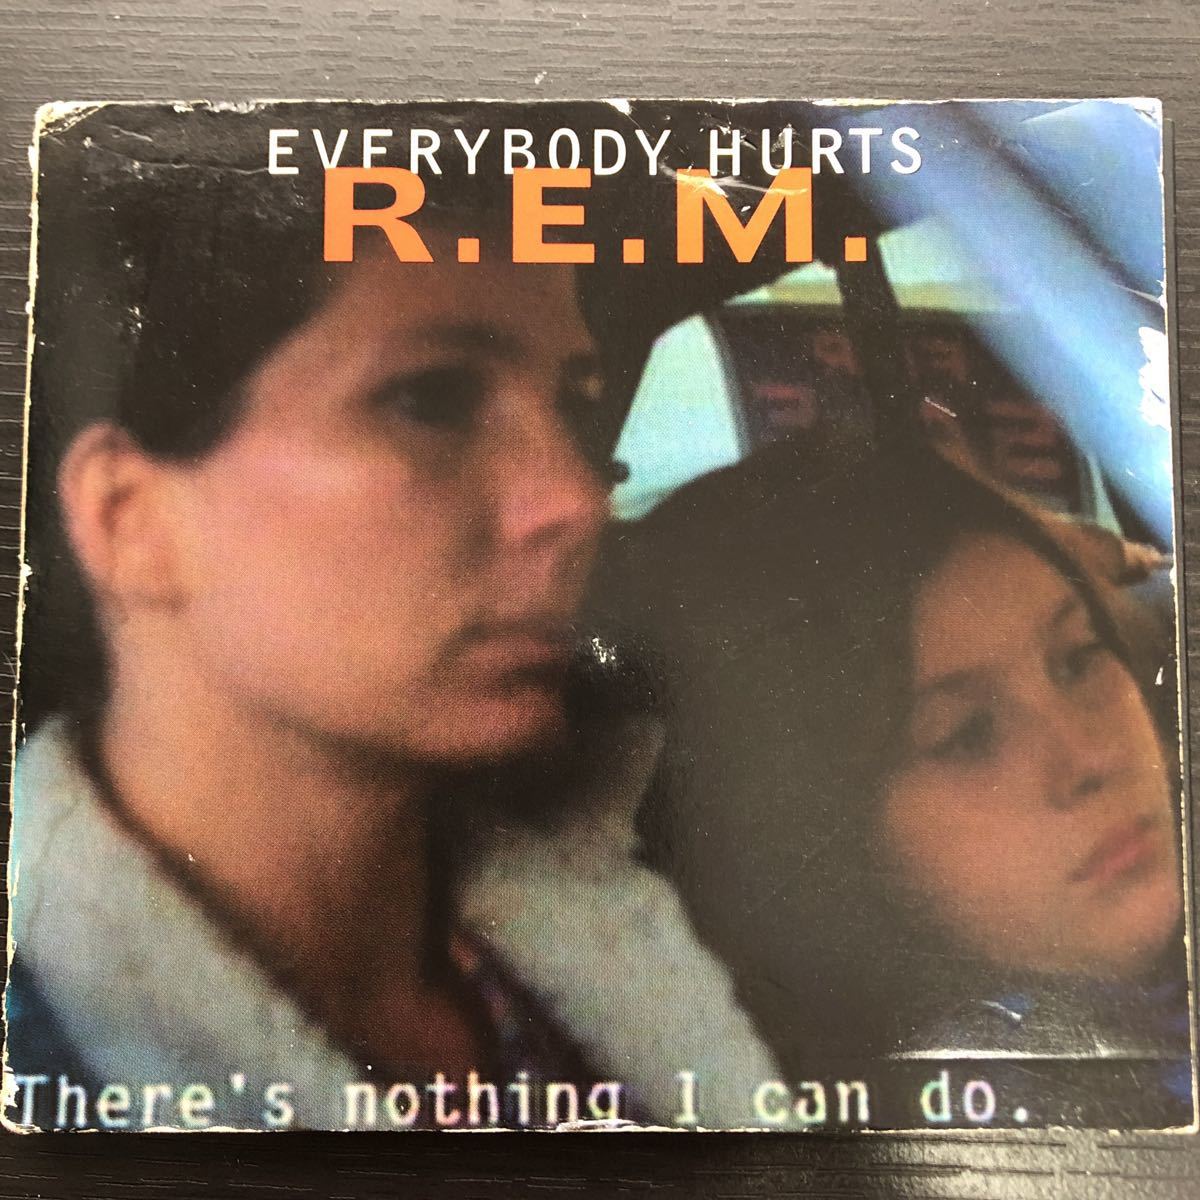 Everybody hurts. Rem Everybody hurts. R.E.M. - Everybody hurts. R.E.M. Everybody hurts 1993. Everybody hurts r.e.m. текст.